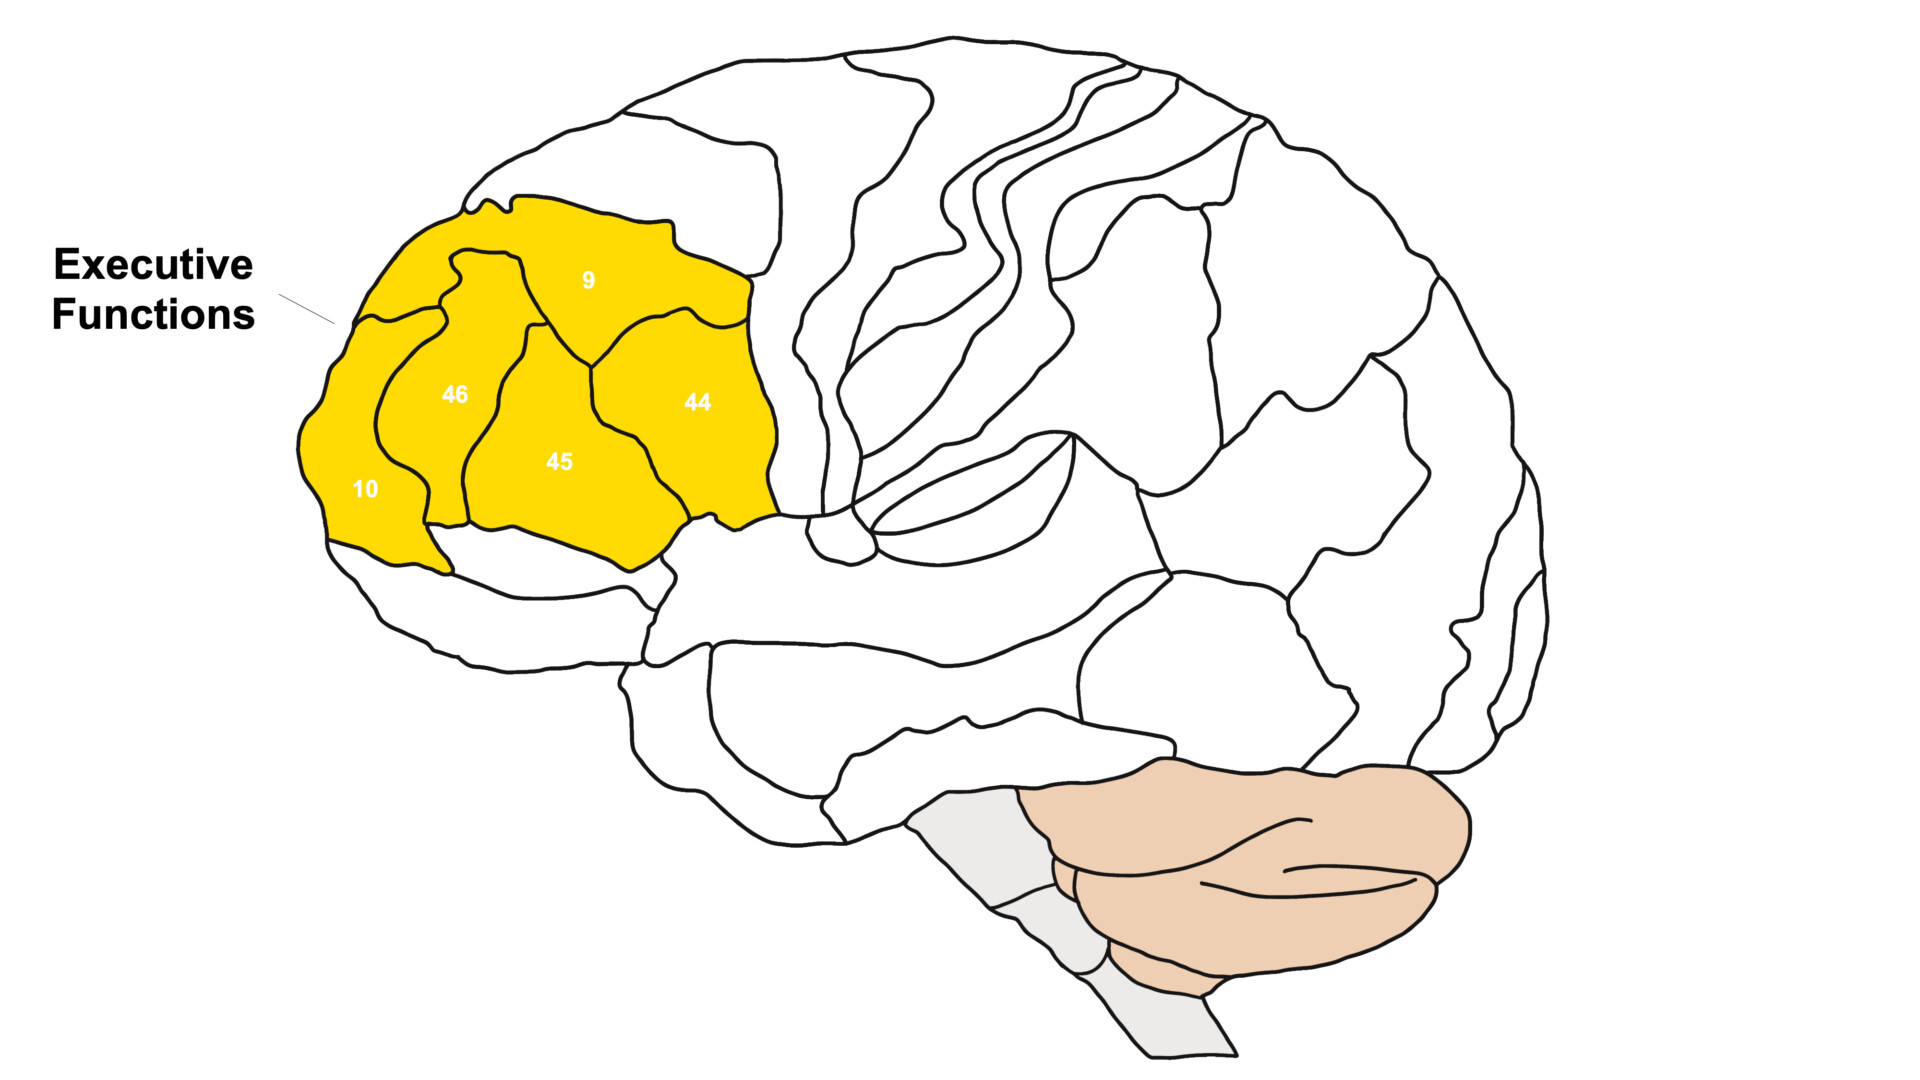 an outline of the brain with the frontal lobe sections highlighted in yellow to signify where the executive functions are located.